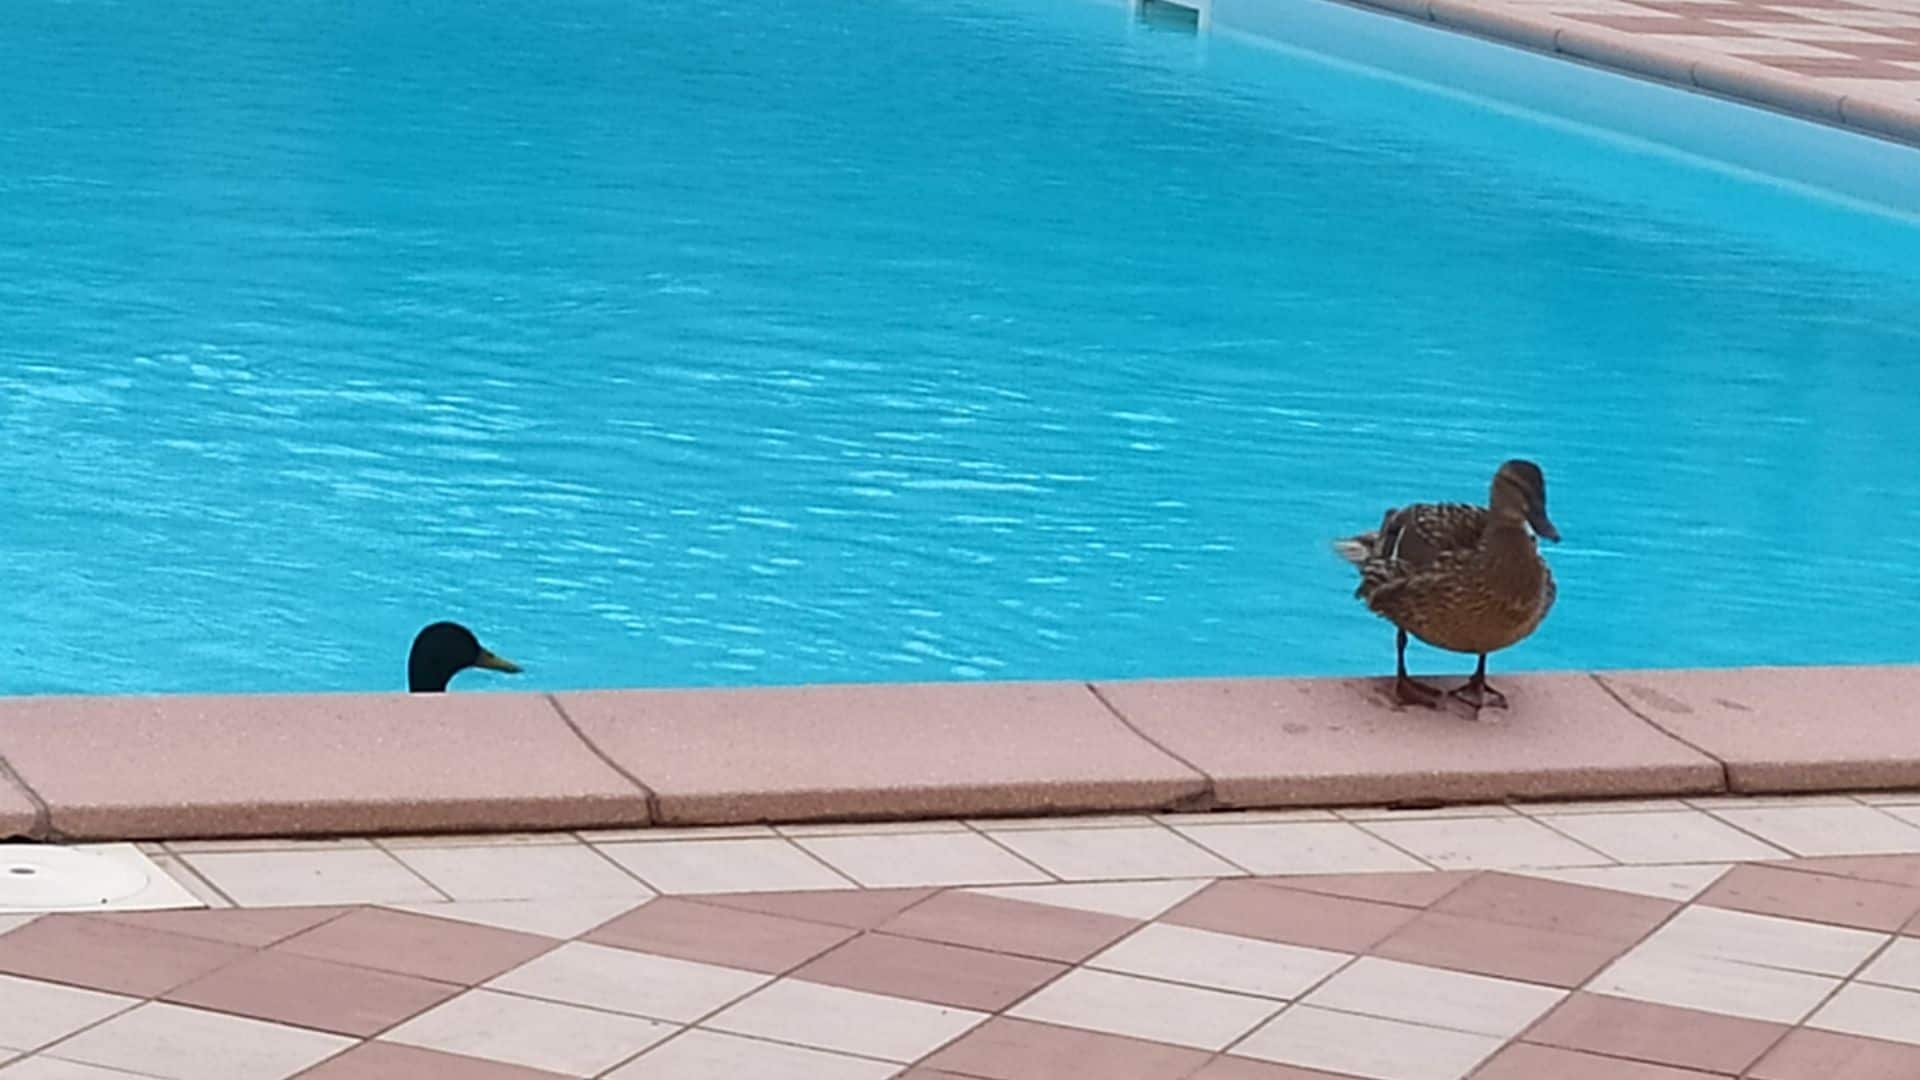 How To Keep Ducks Out Of Your Pool – 11 Useful Tips